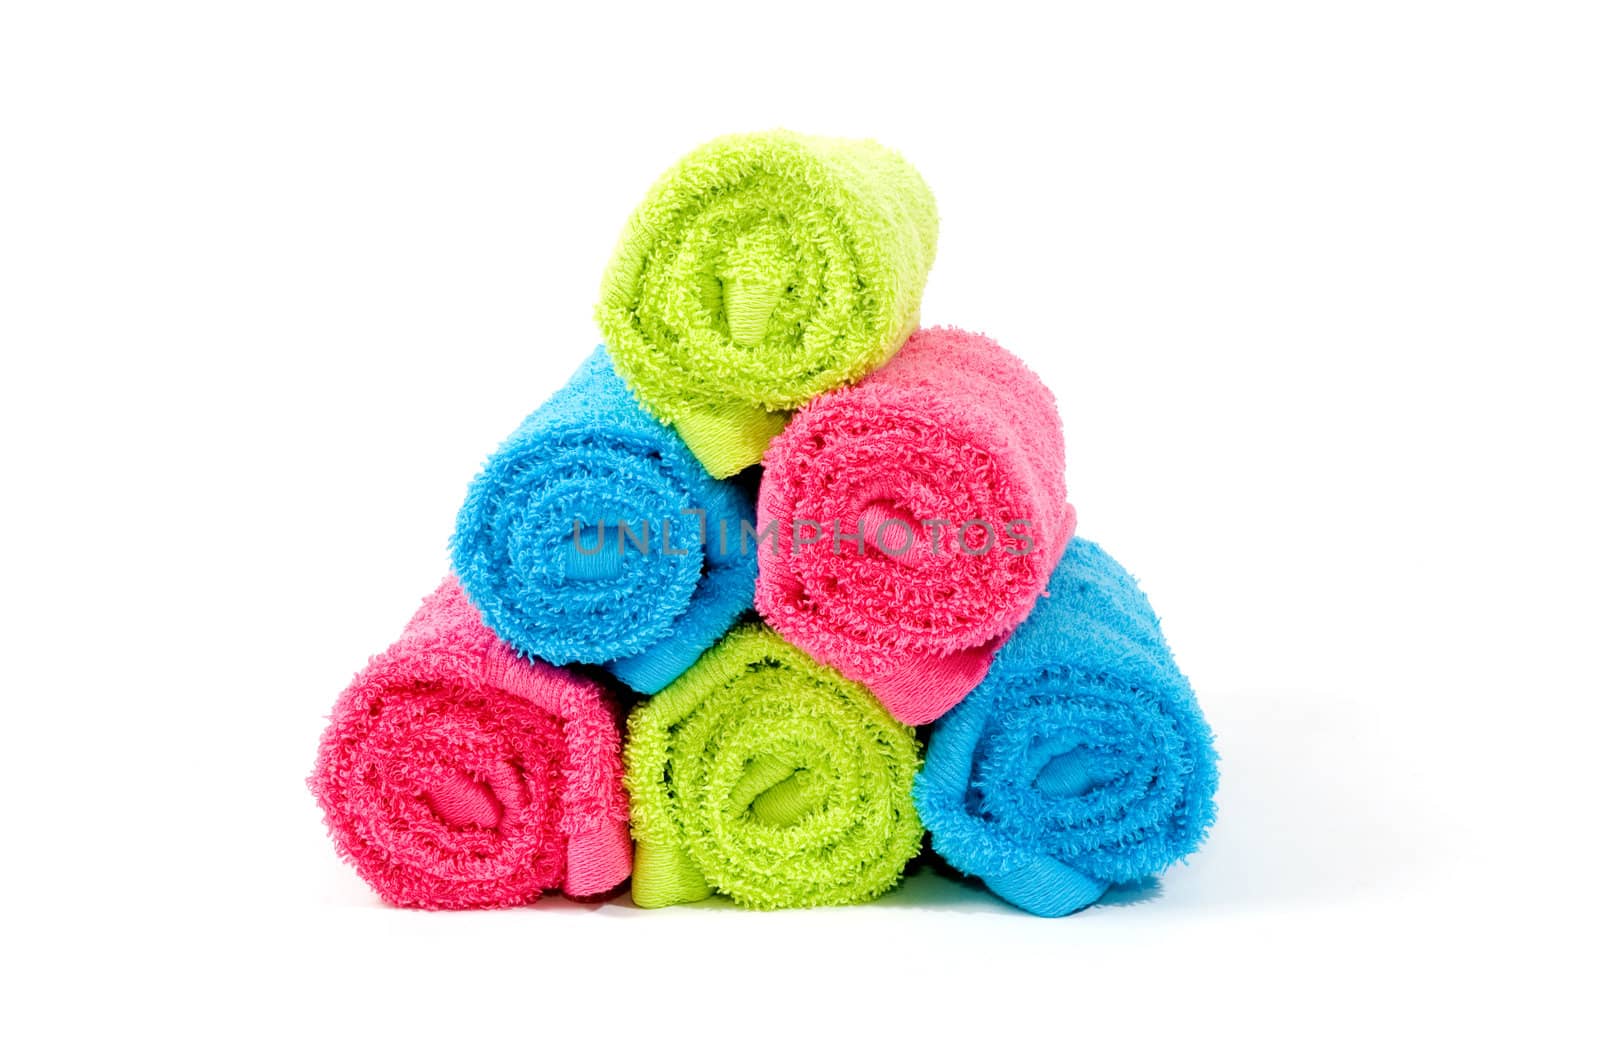 Colorful towel rolls on a white background by ladyminnie